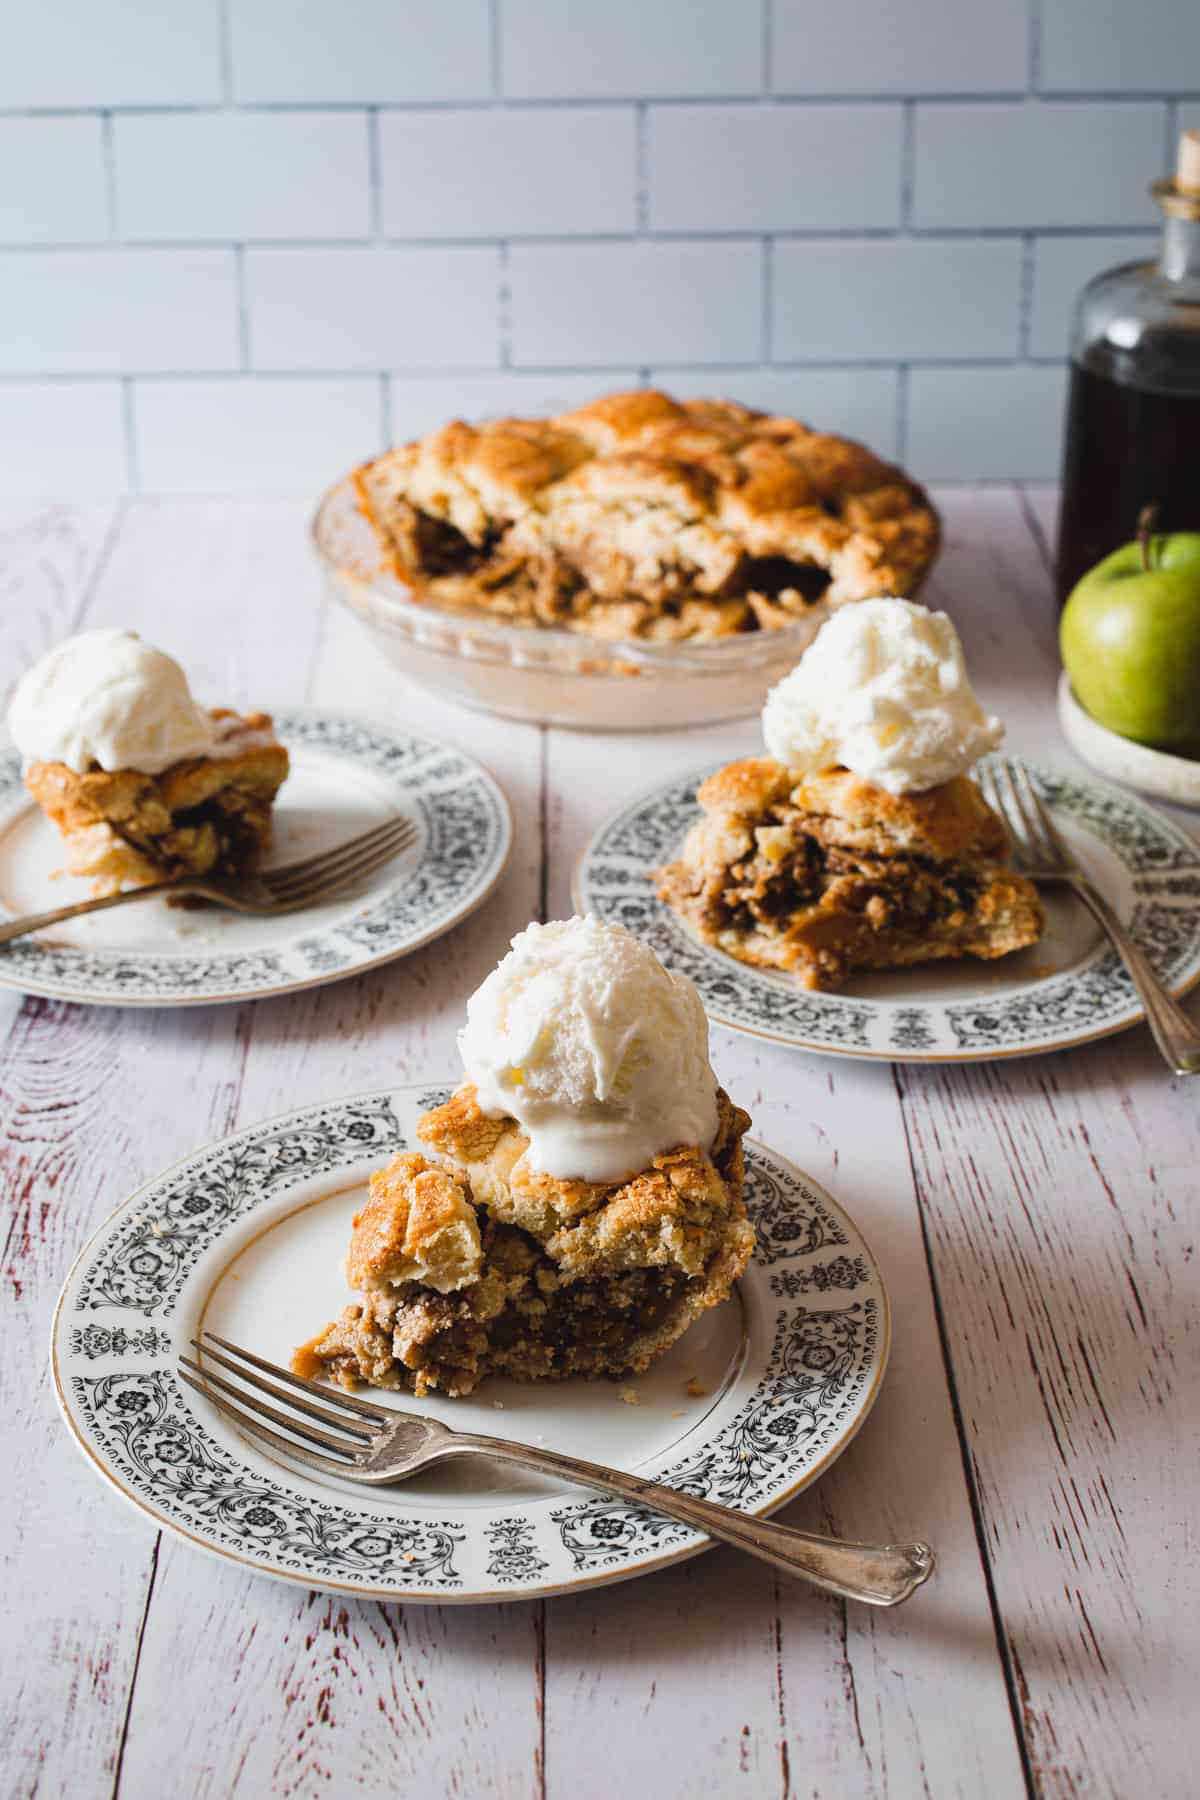 three slices of cutting into a slice of gluten free apple pie with ice cream